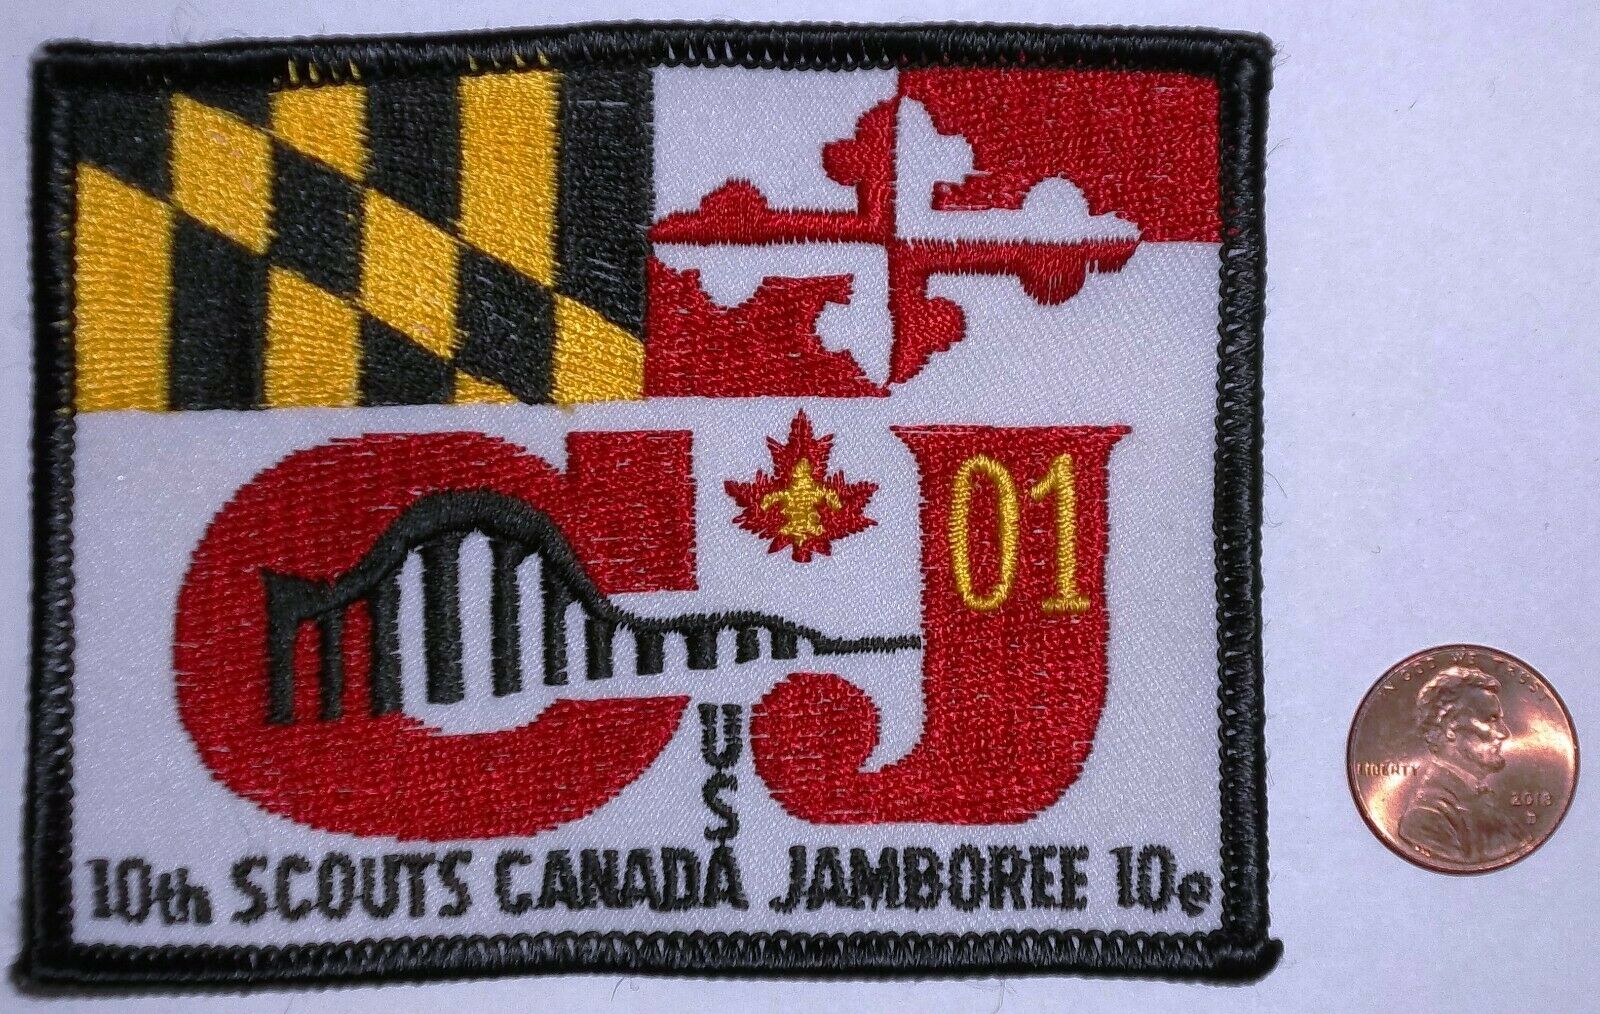 Bsa Bsc 2001 10th Scouts Canada Canadian Jamboree Contingent Pocket Patch